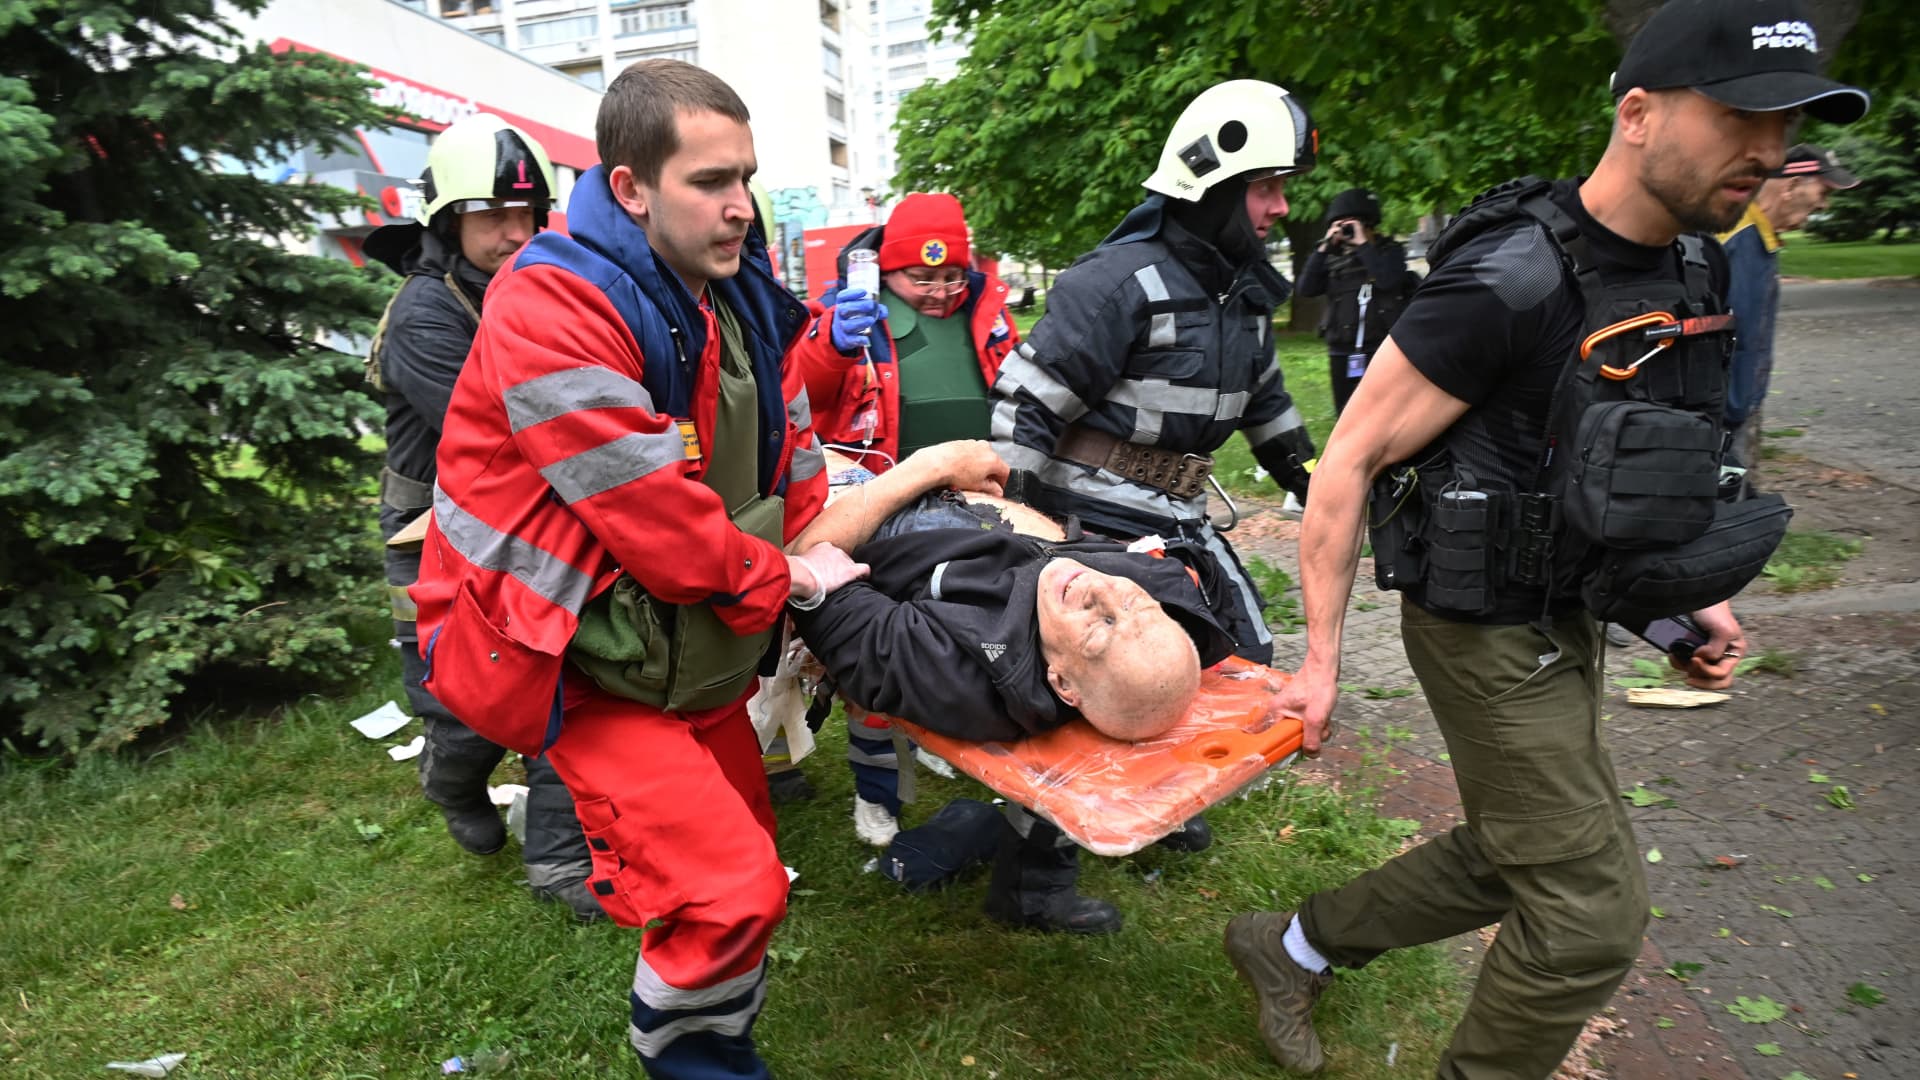 Paramedics and emergency workers carry a man wounded in shelling in Kharkiv on May 26, 2022, on the 91st day of Russia's invasion of Ukraine.